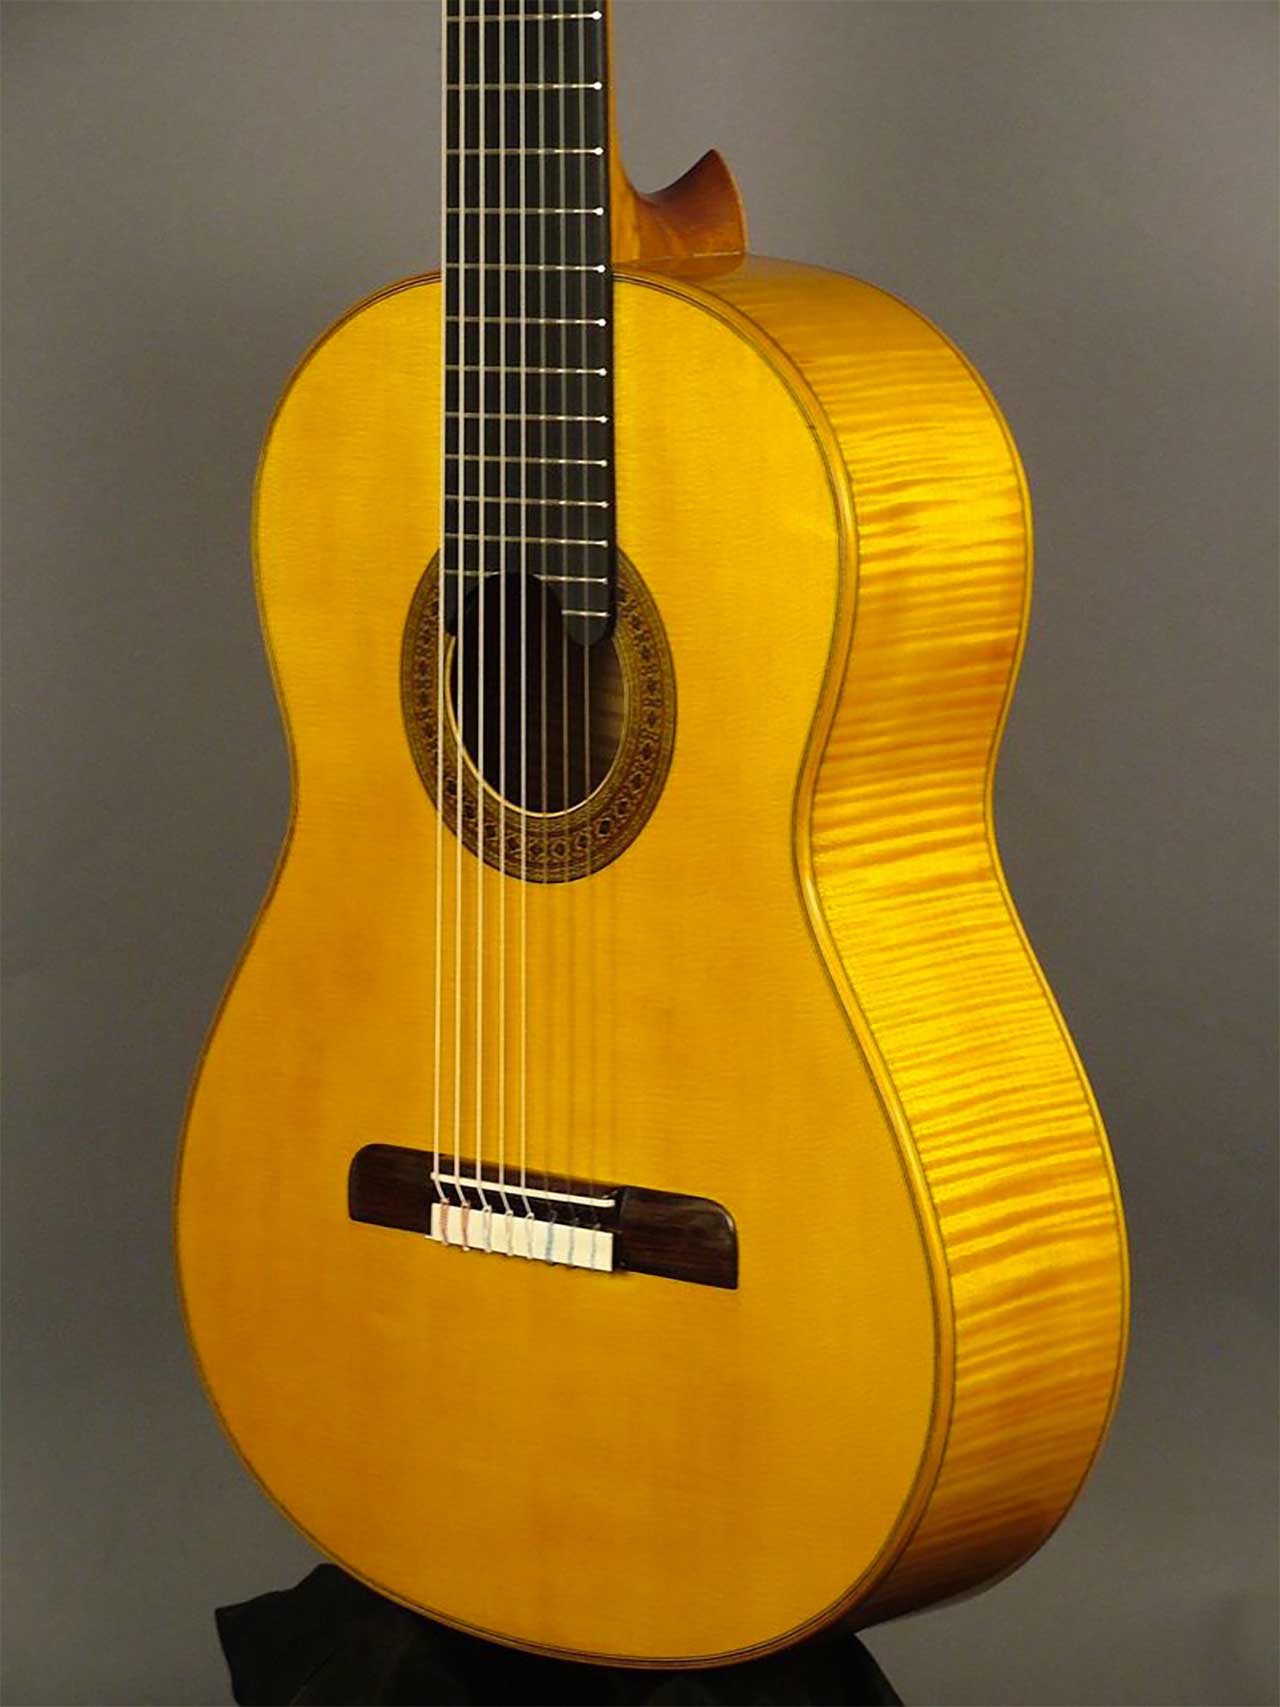 A Legacy of Quality: Lorenzo Frignani's Guitars and Stringed Instruments - The Frignani Lorenzo Classical Concert Guitar 8 Strings